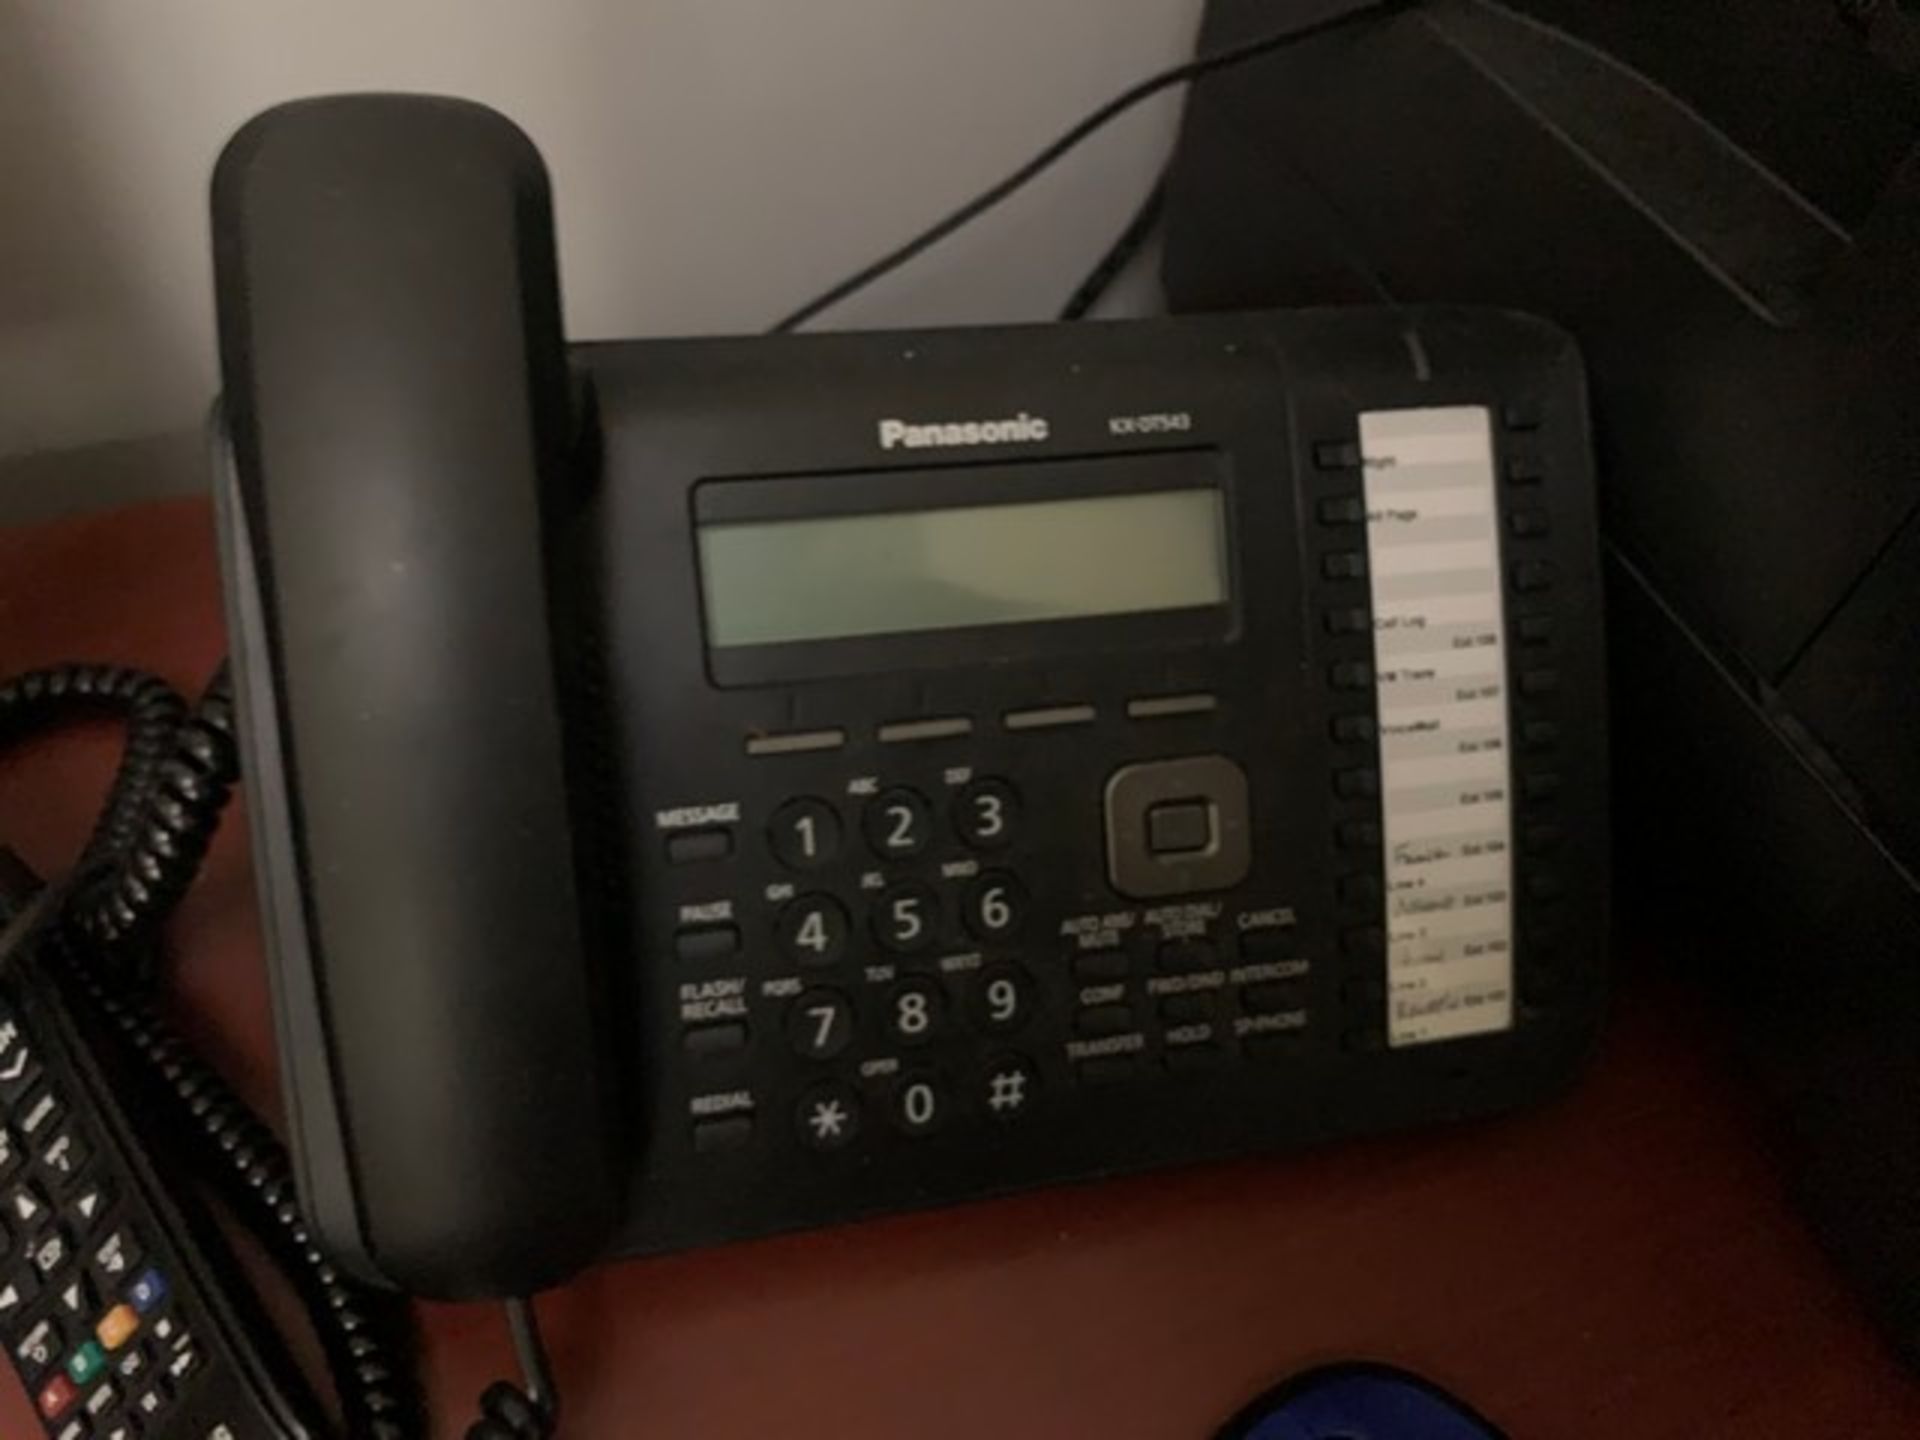 PANASONIC KXNS700 TELEPHONE SYSTEM WITH 5 PHONES - Image 4 of 8